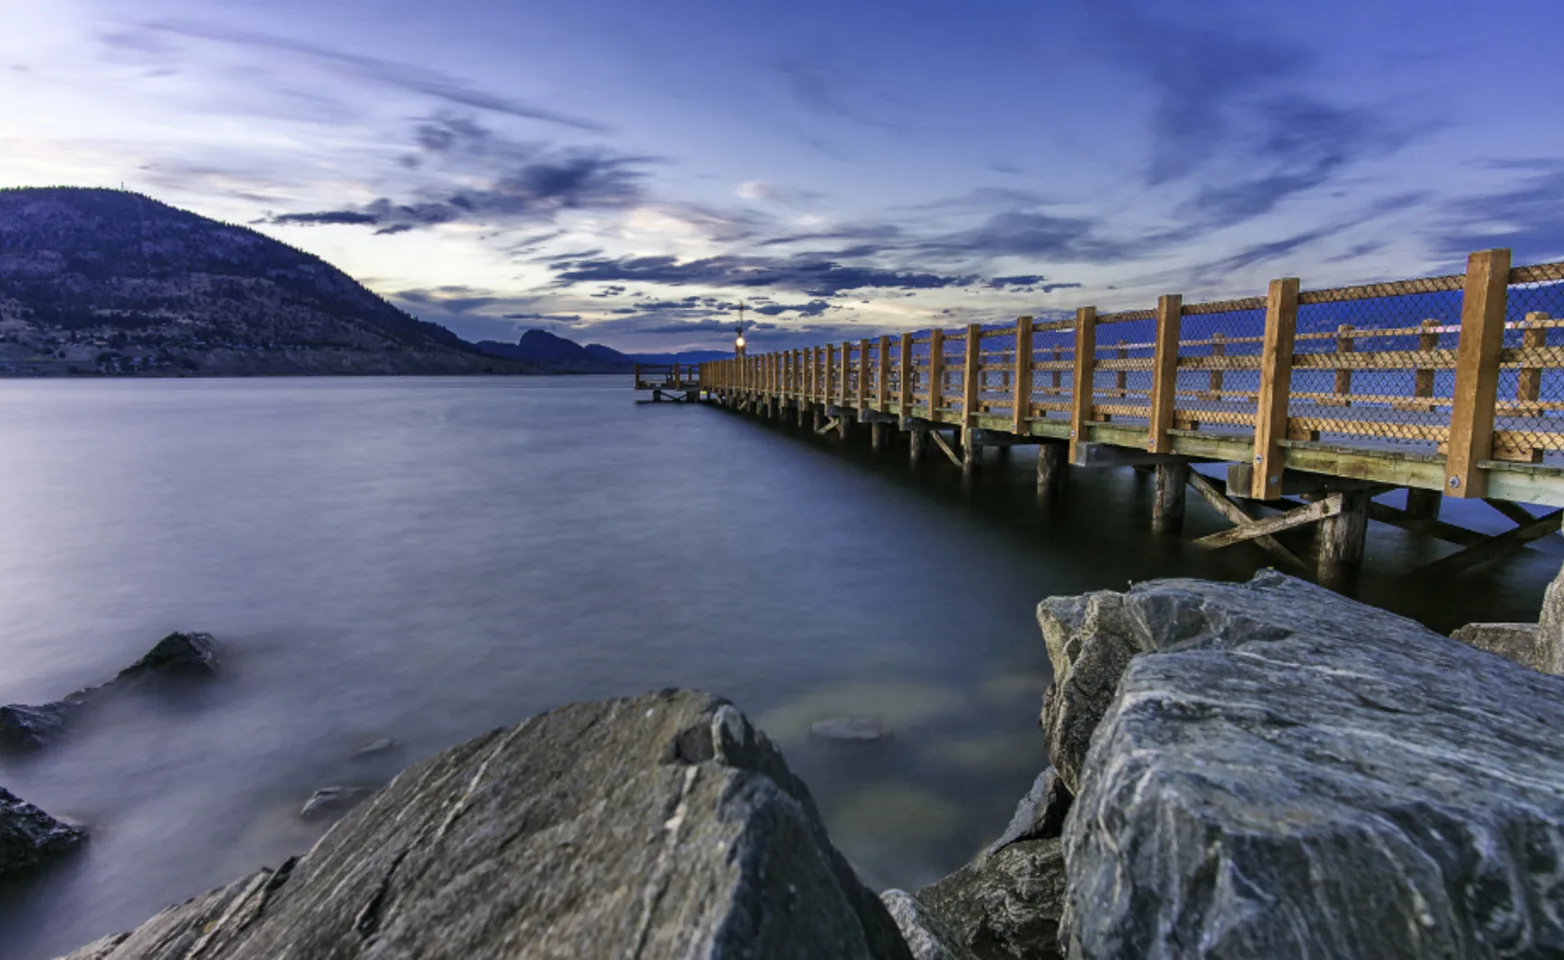 A boardwalk and late in Penticton, BC